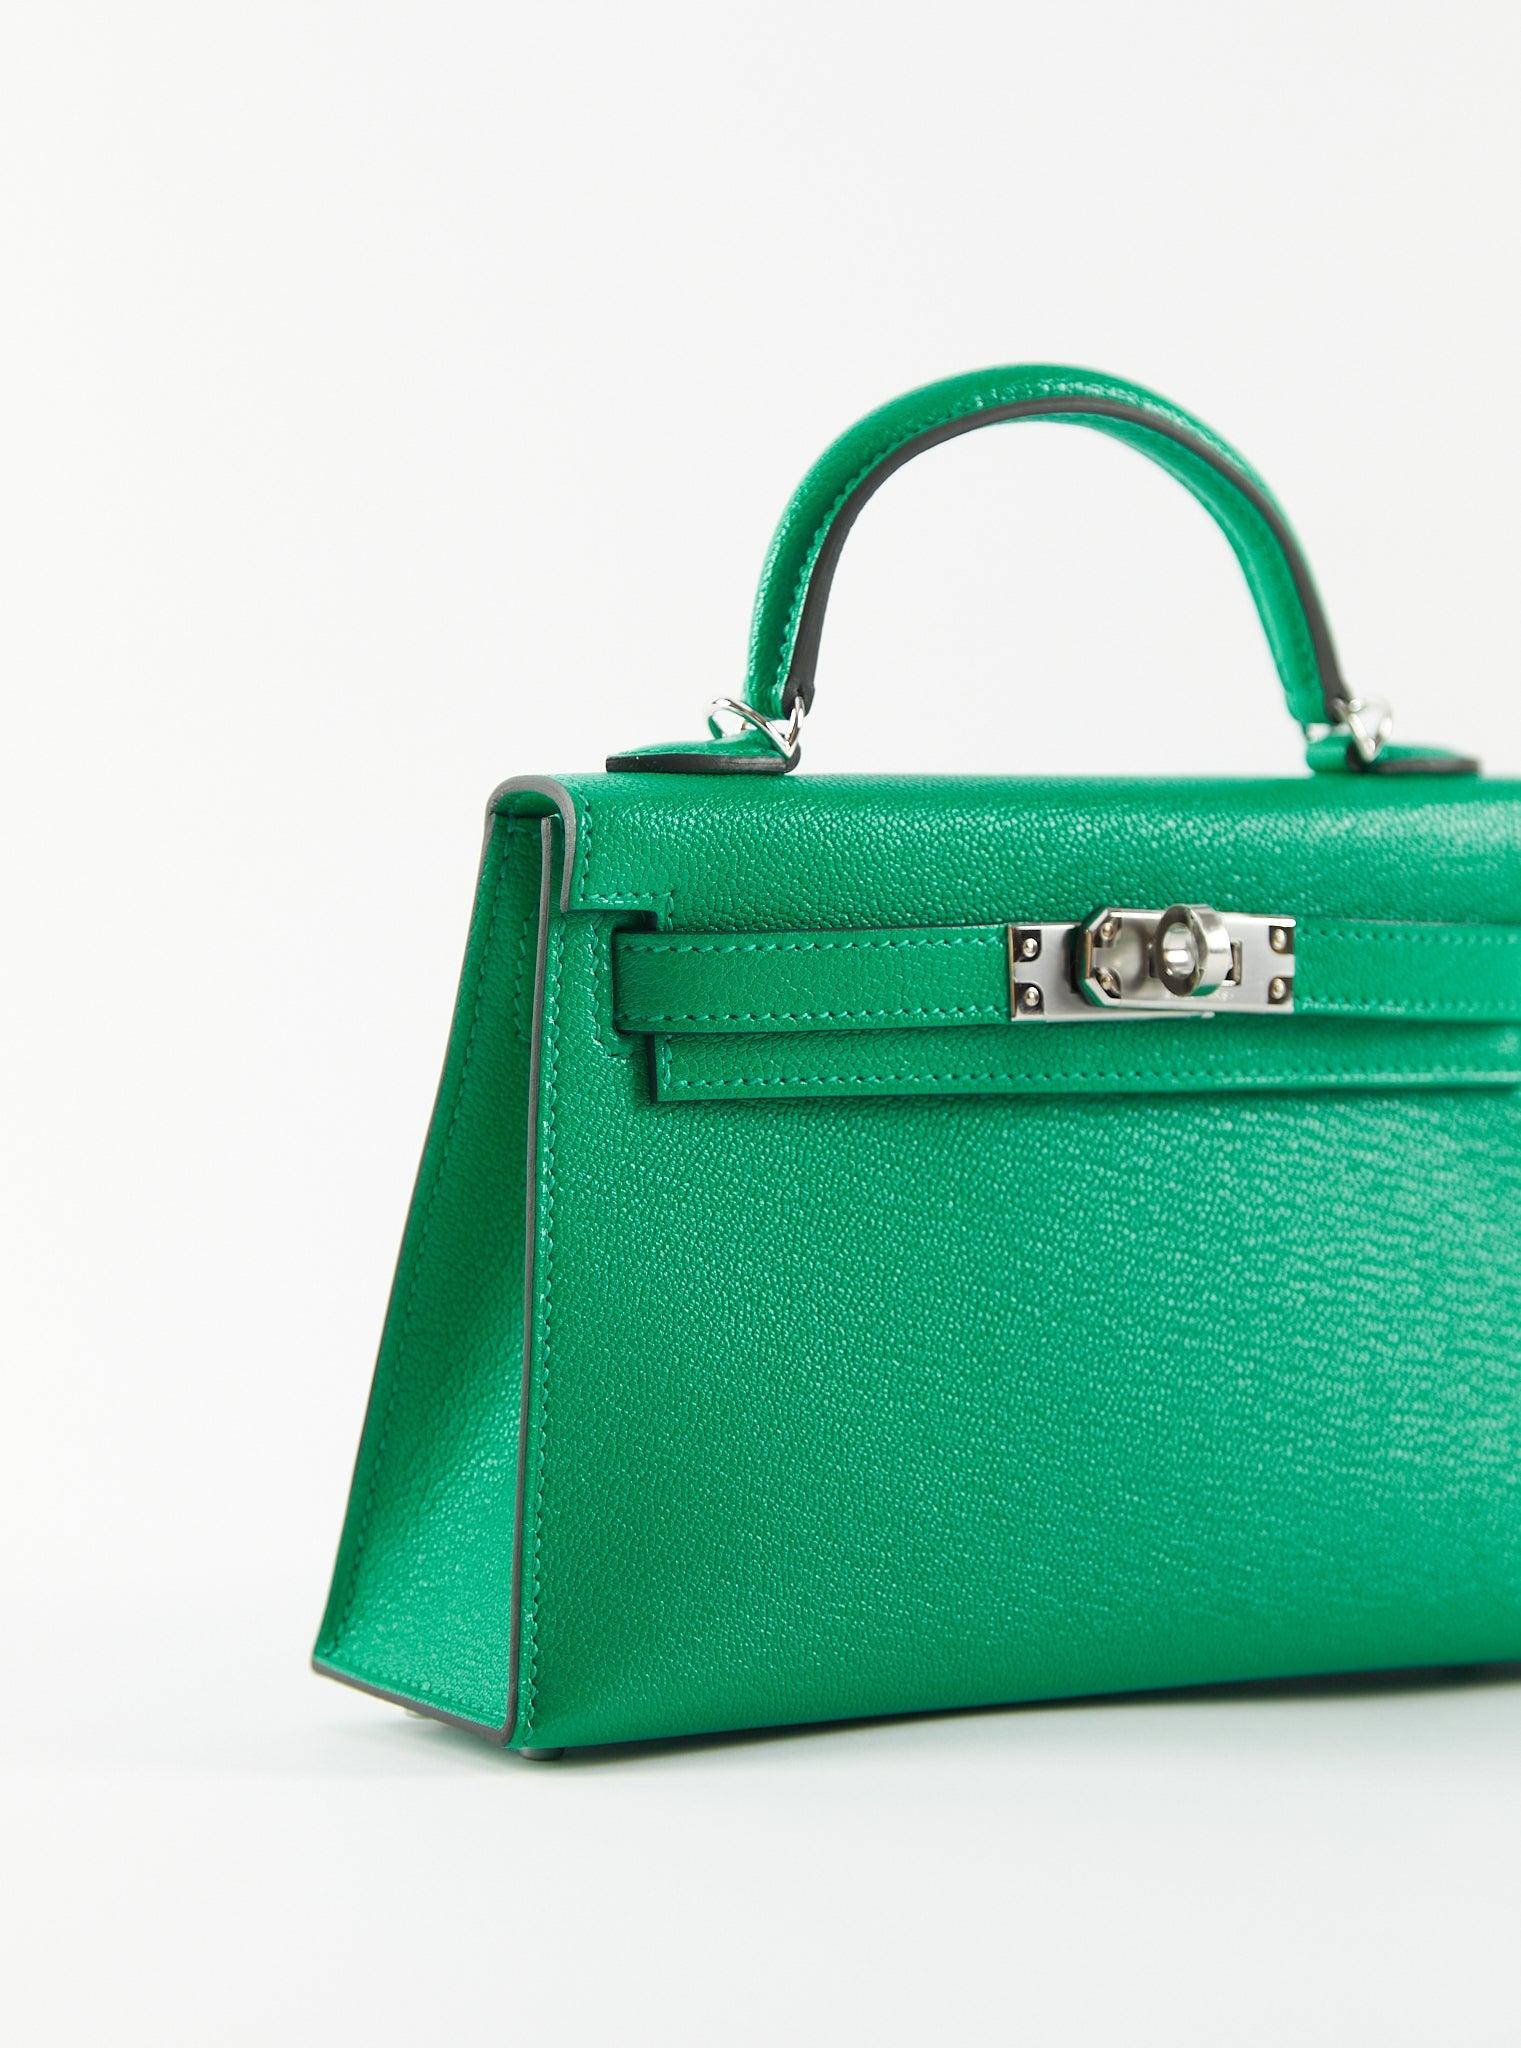 HERMÈS MINI KELLY II 20CM MENTHE Chèvre Leather with Palladium Hardware In Excellent Condition For Sale In London, GB